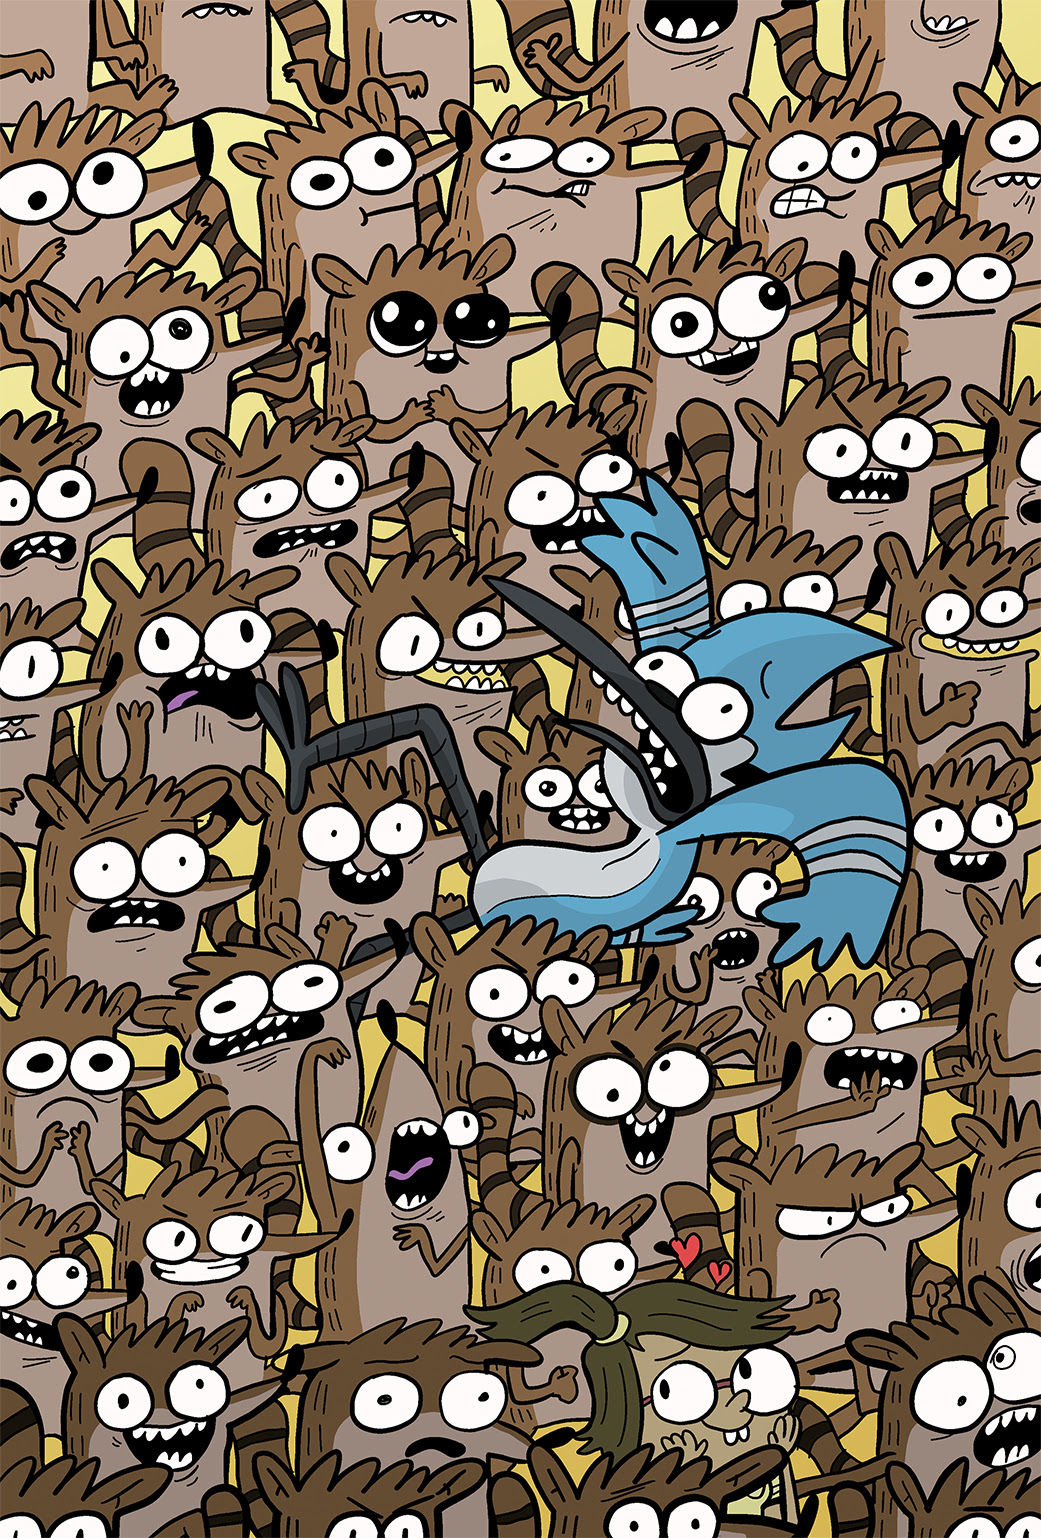 REGULAR SHOW 2014 ANNUAL #1 Cover C by KC Green